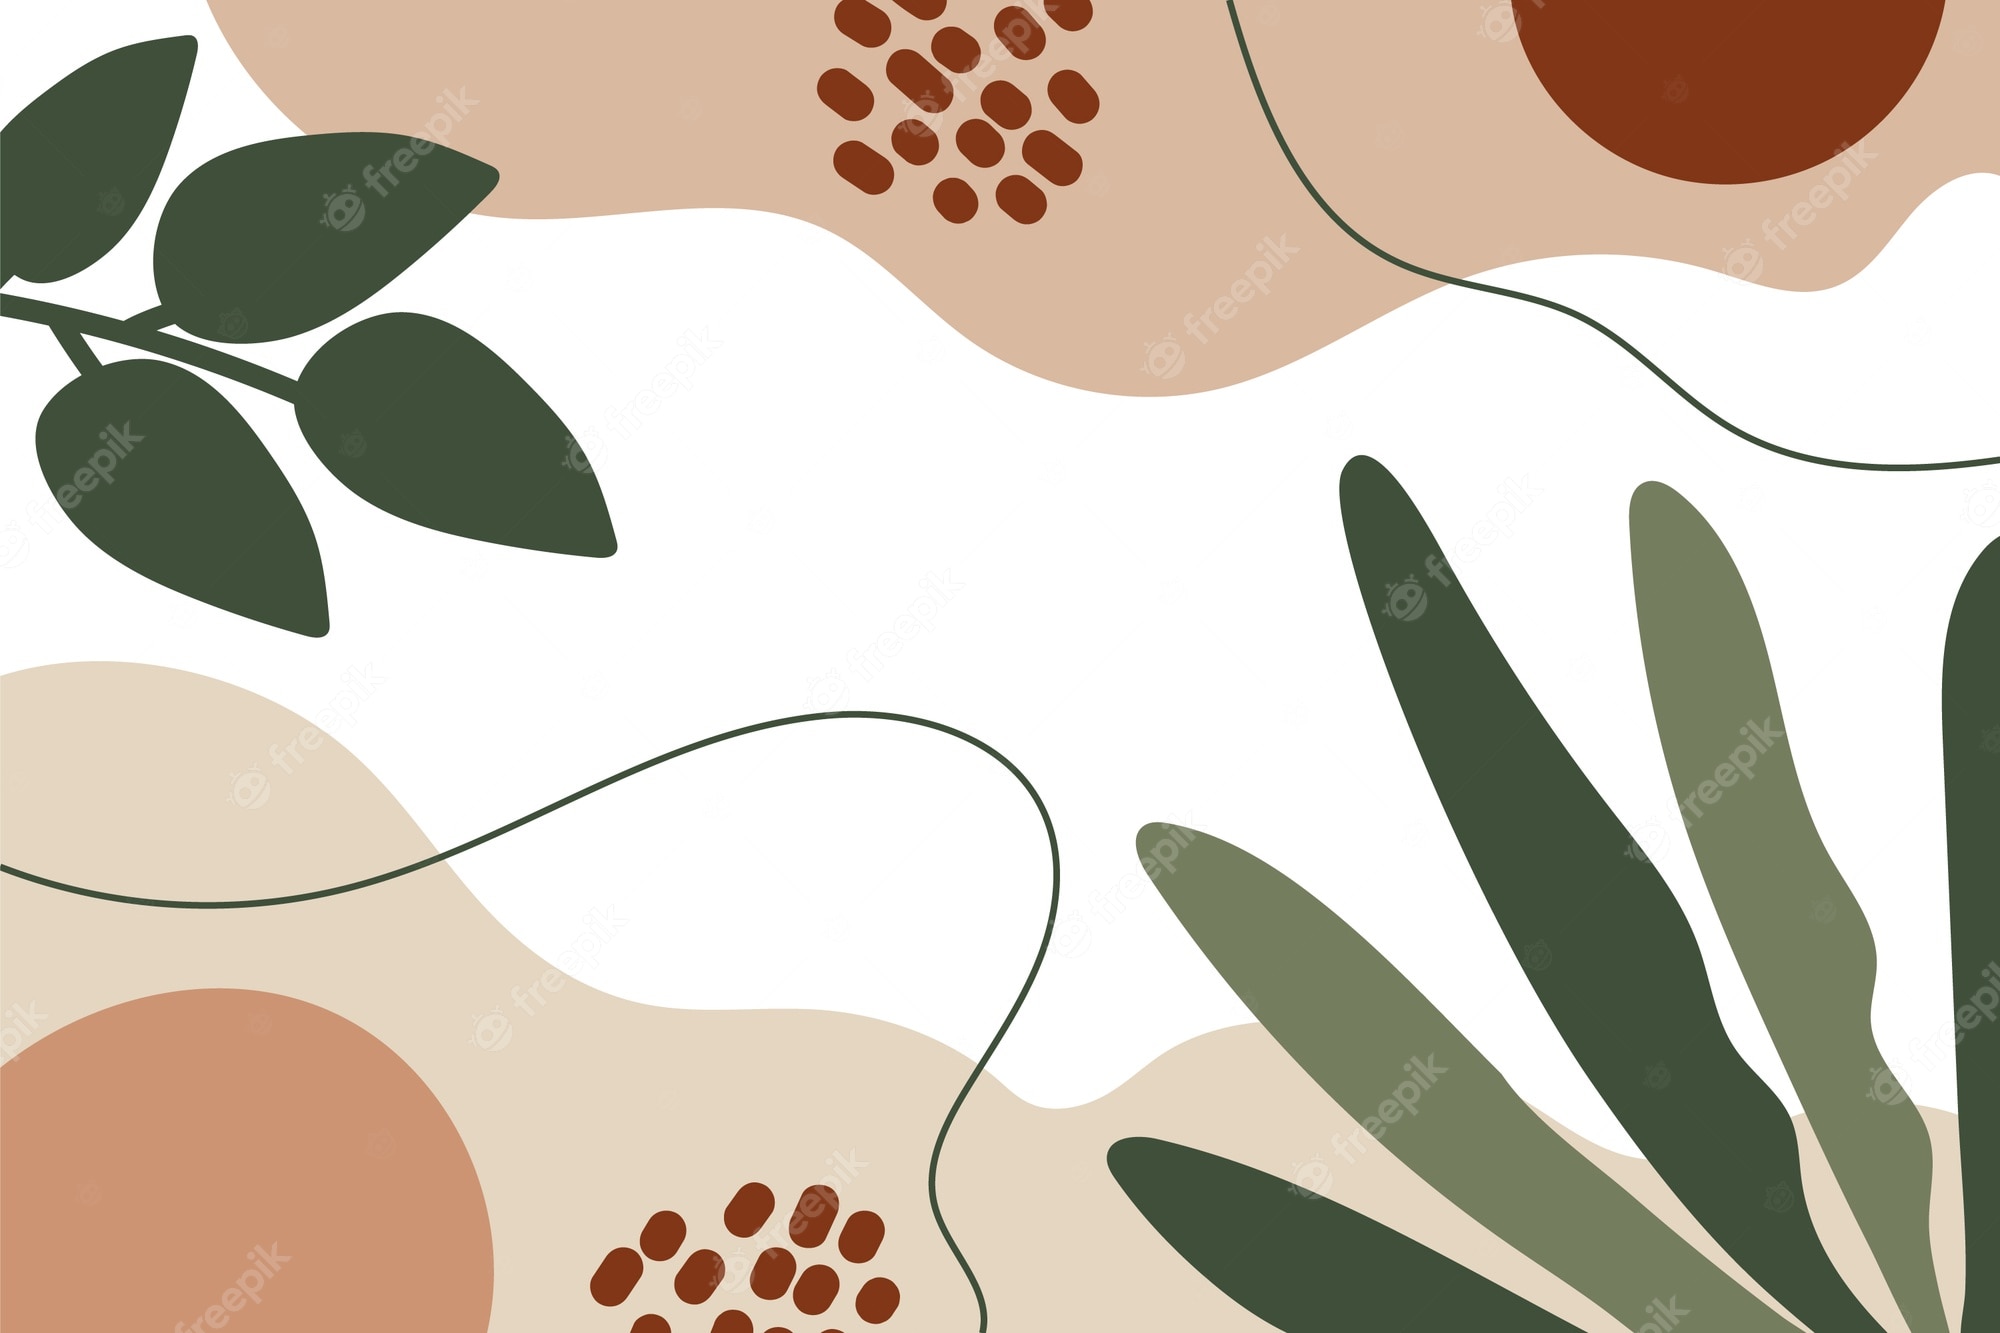 Terracotta pattern Vectors & Illustrations for Free Download